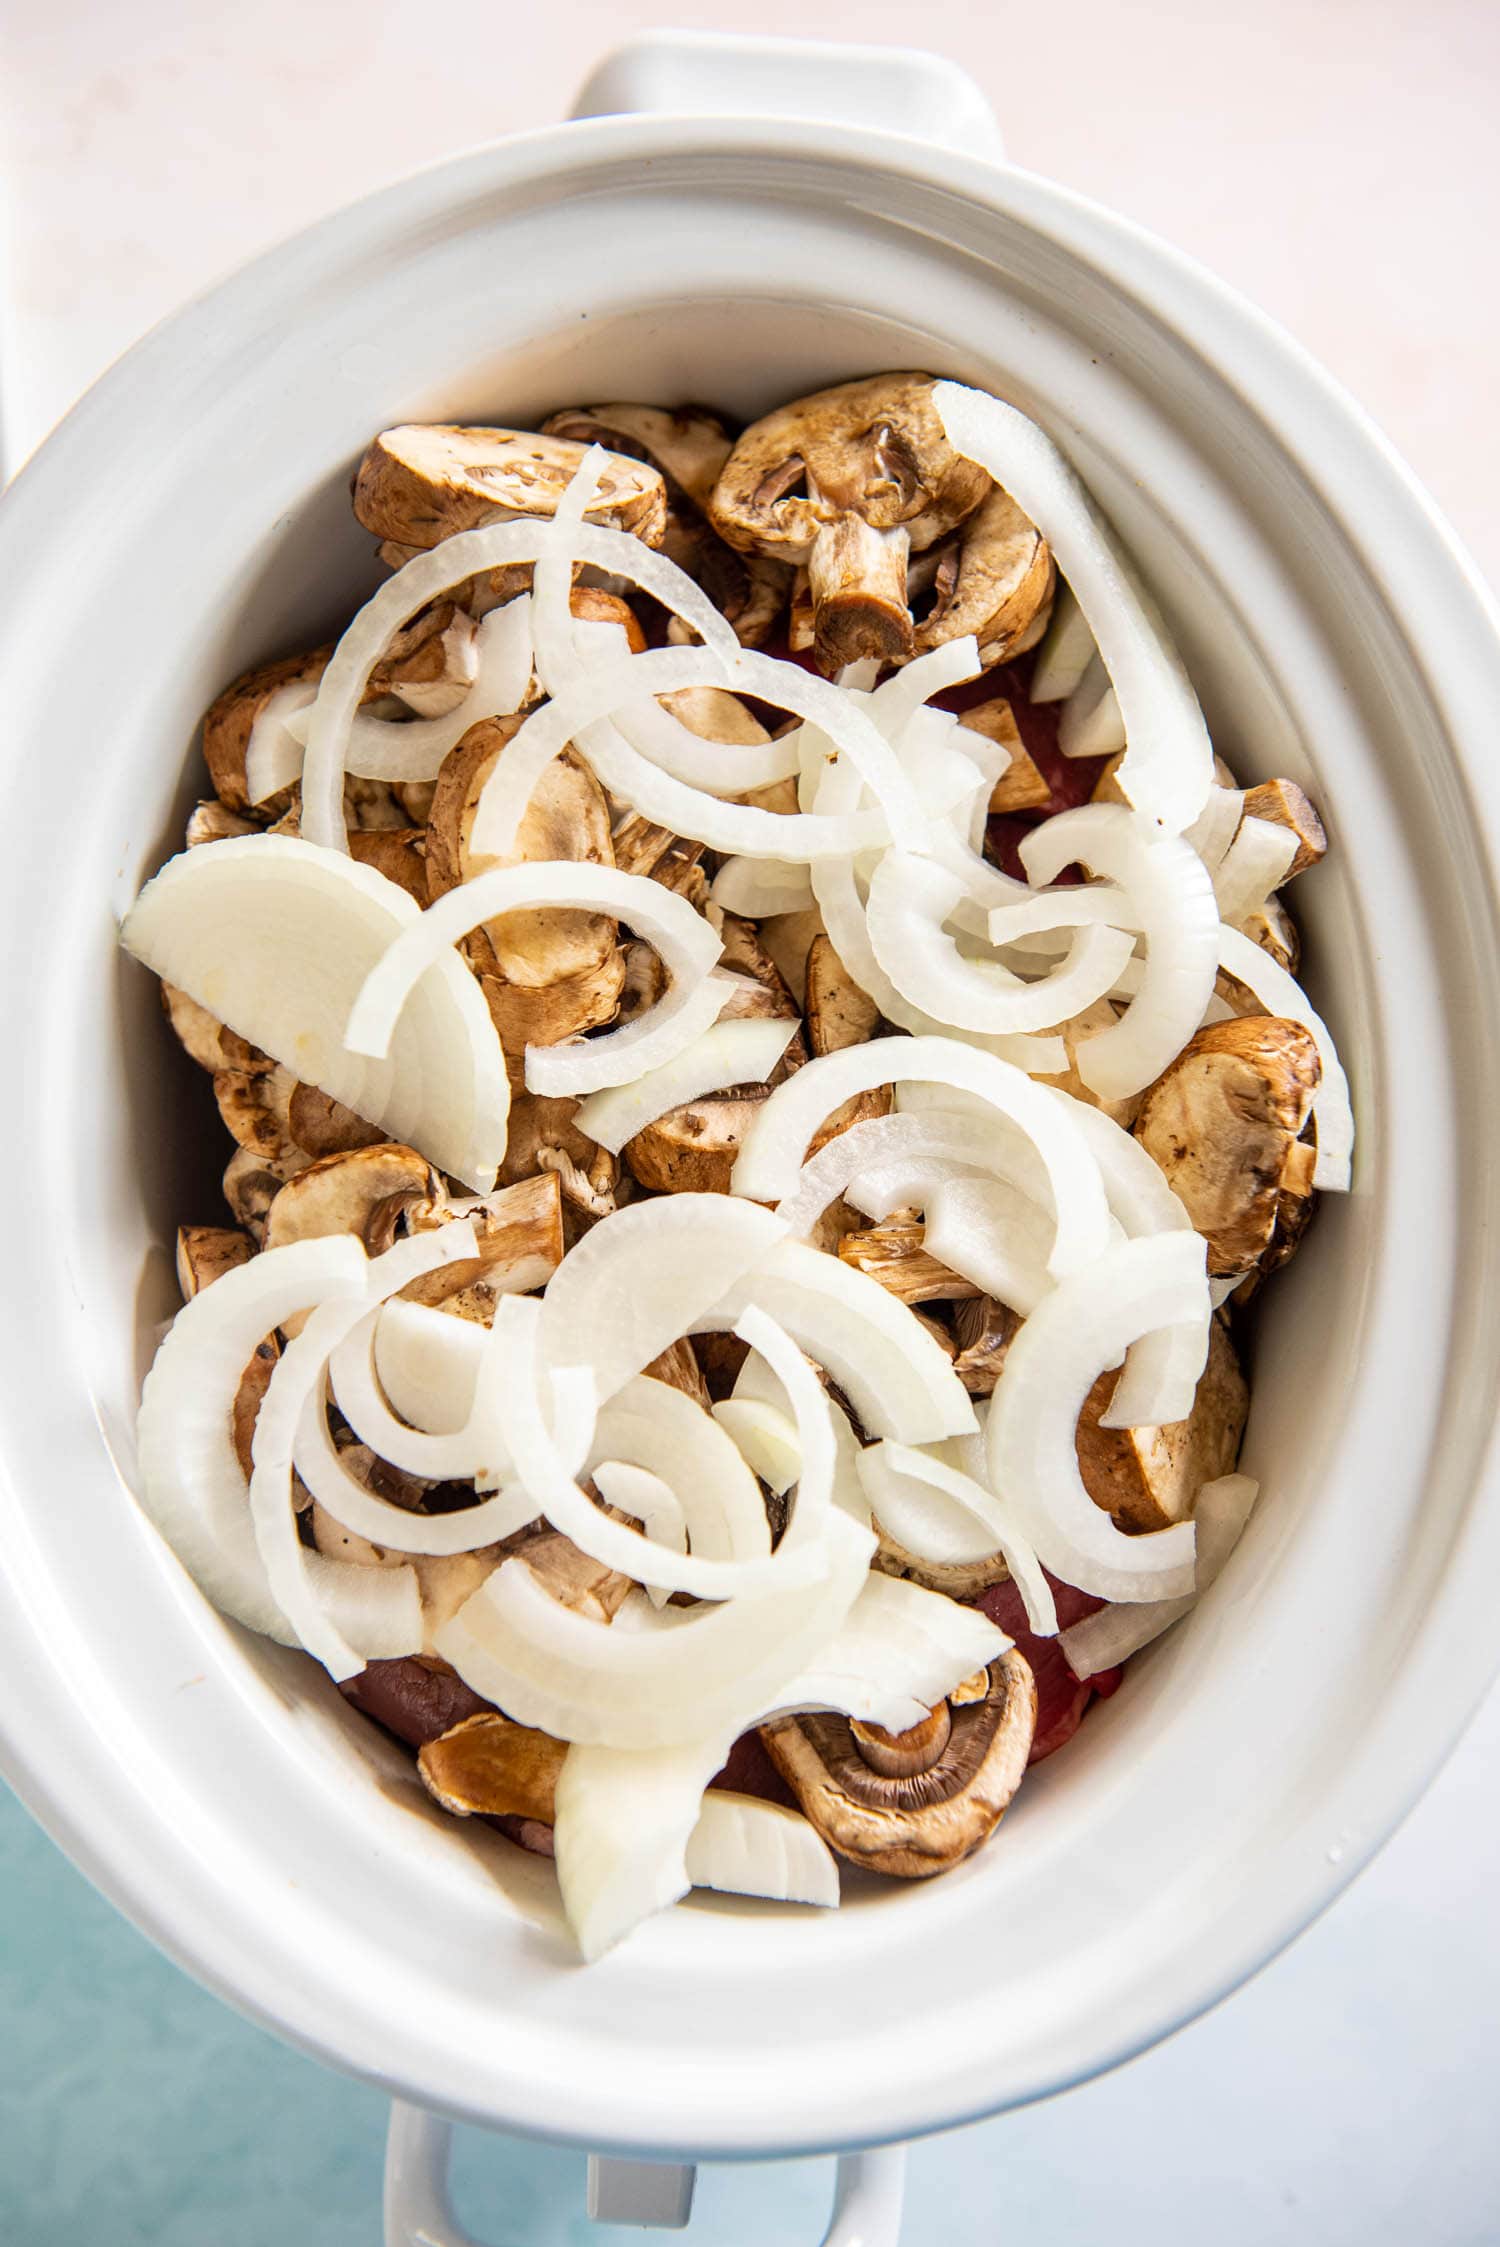 slow cooker containing grass fed angus beef, baby bella mushrooms, and sliced onions on top